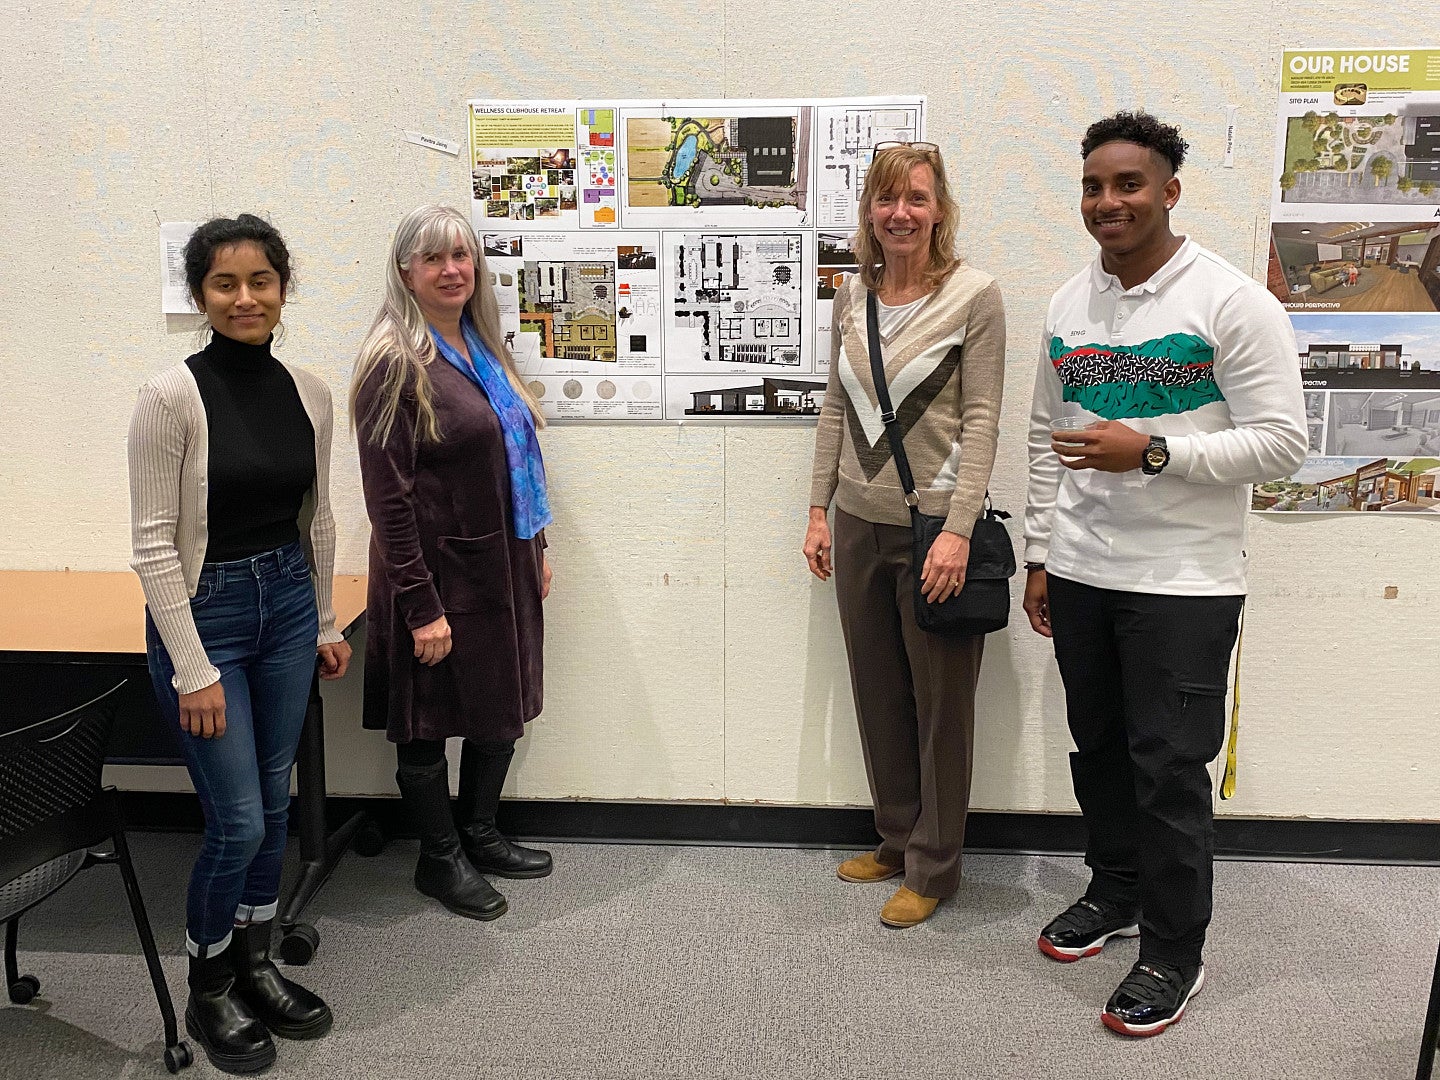 2 interior architecture students and 2 Arc workers posing with a student project depicting the Arc clubhouse